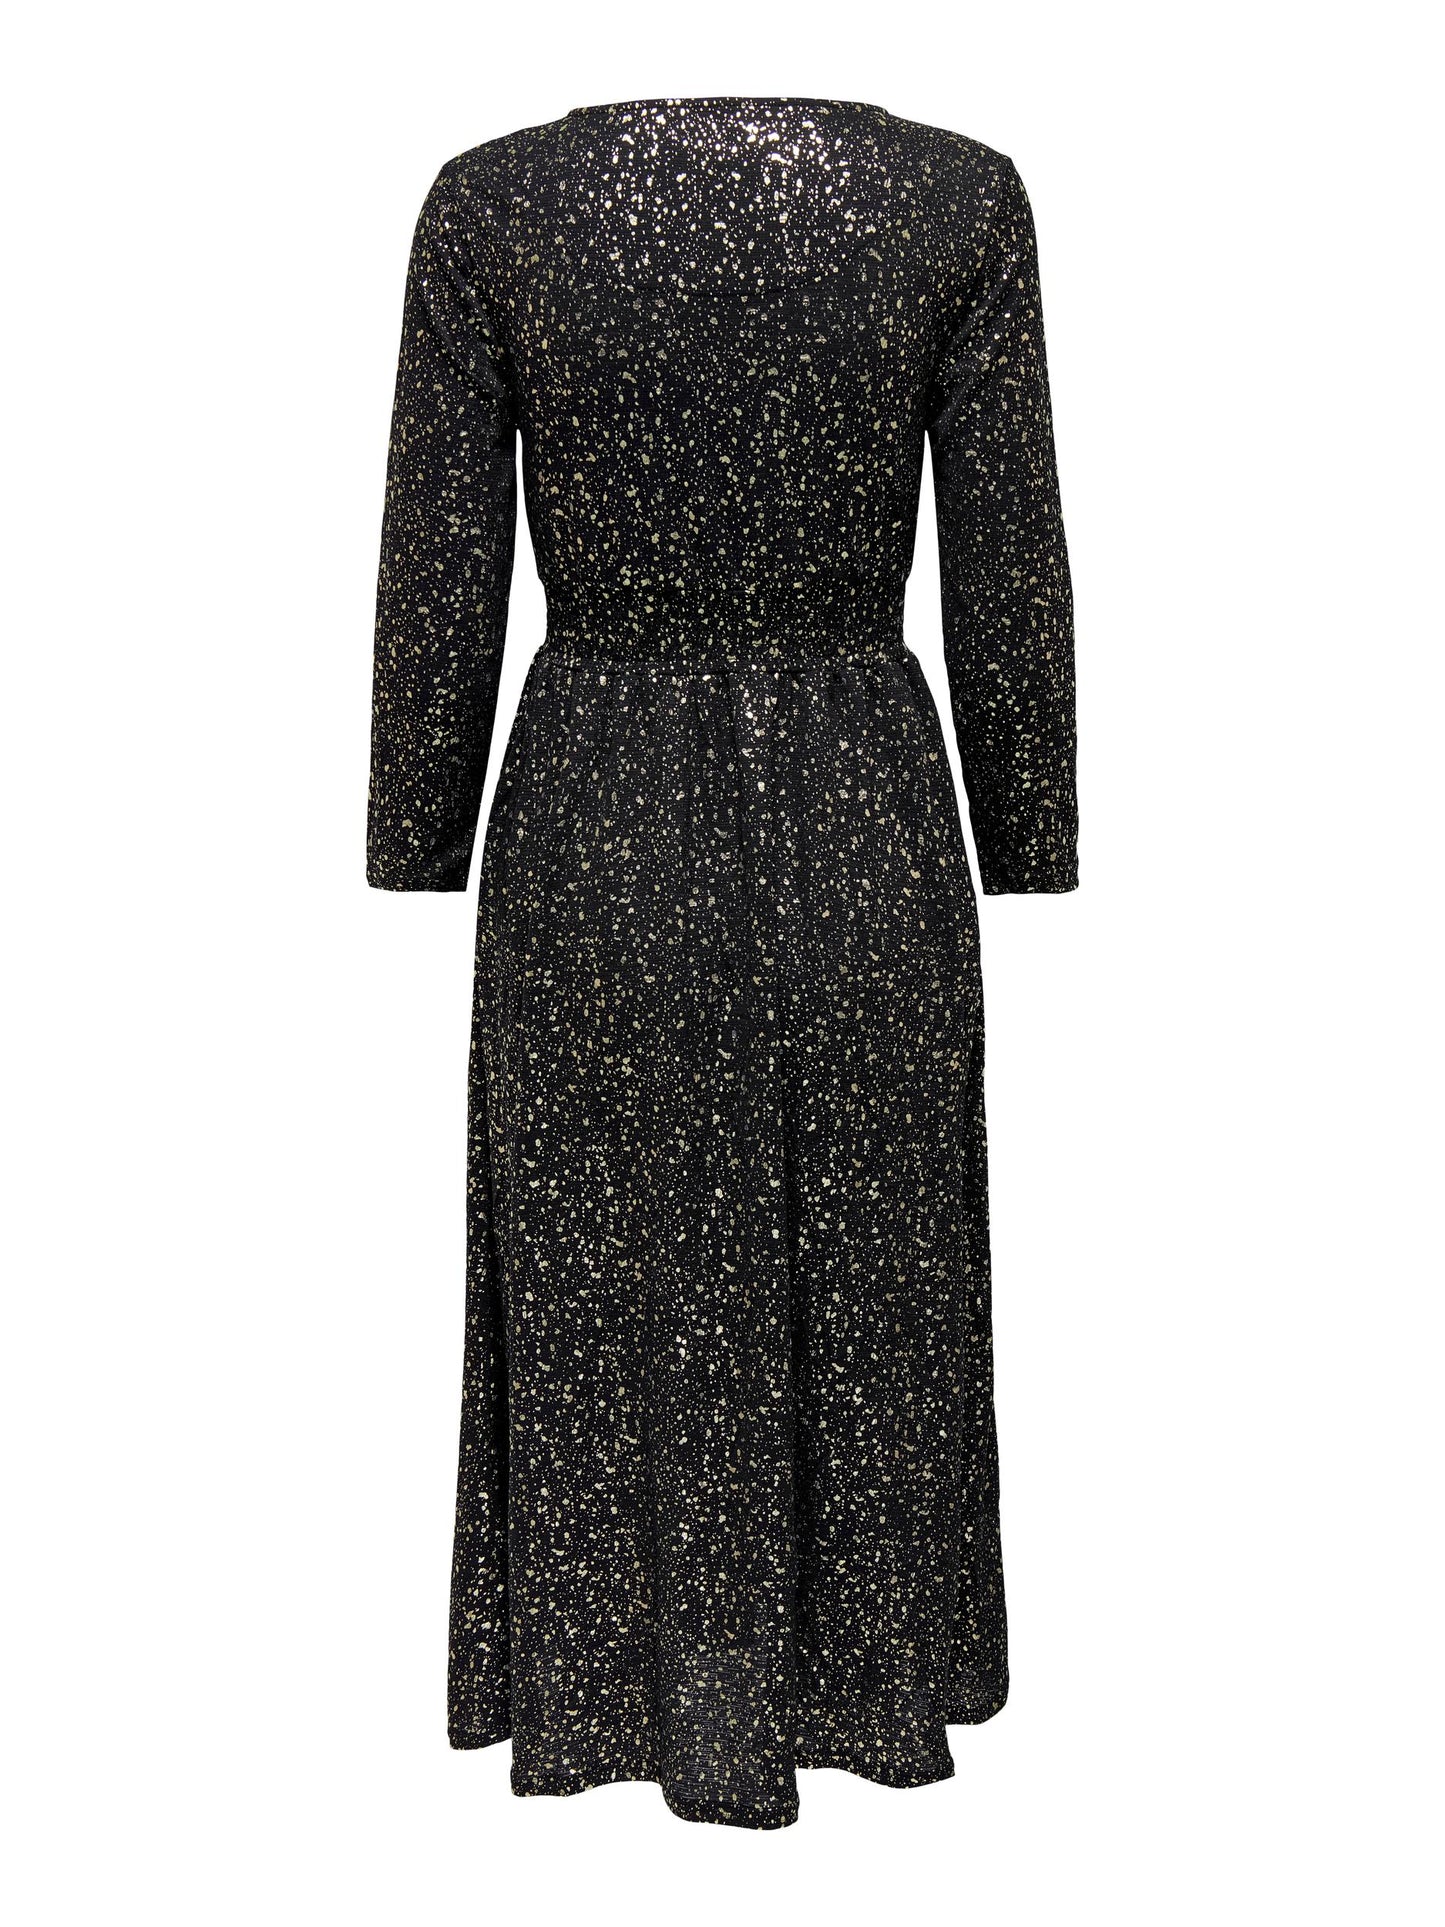 
                  
                    ONLY Pella Splatter Print Three Quarter Sleeve Midi Wrap Dress in Black with Gold Foil - One Nation Clothing
                  
                